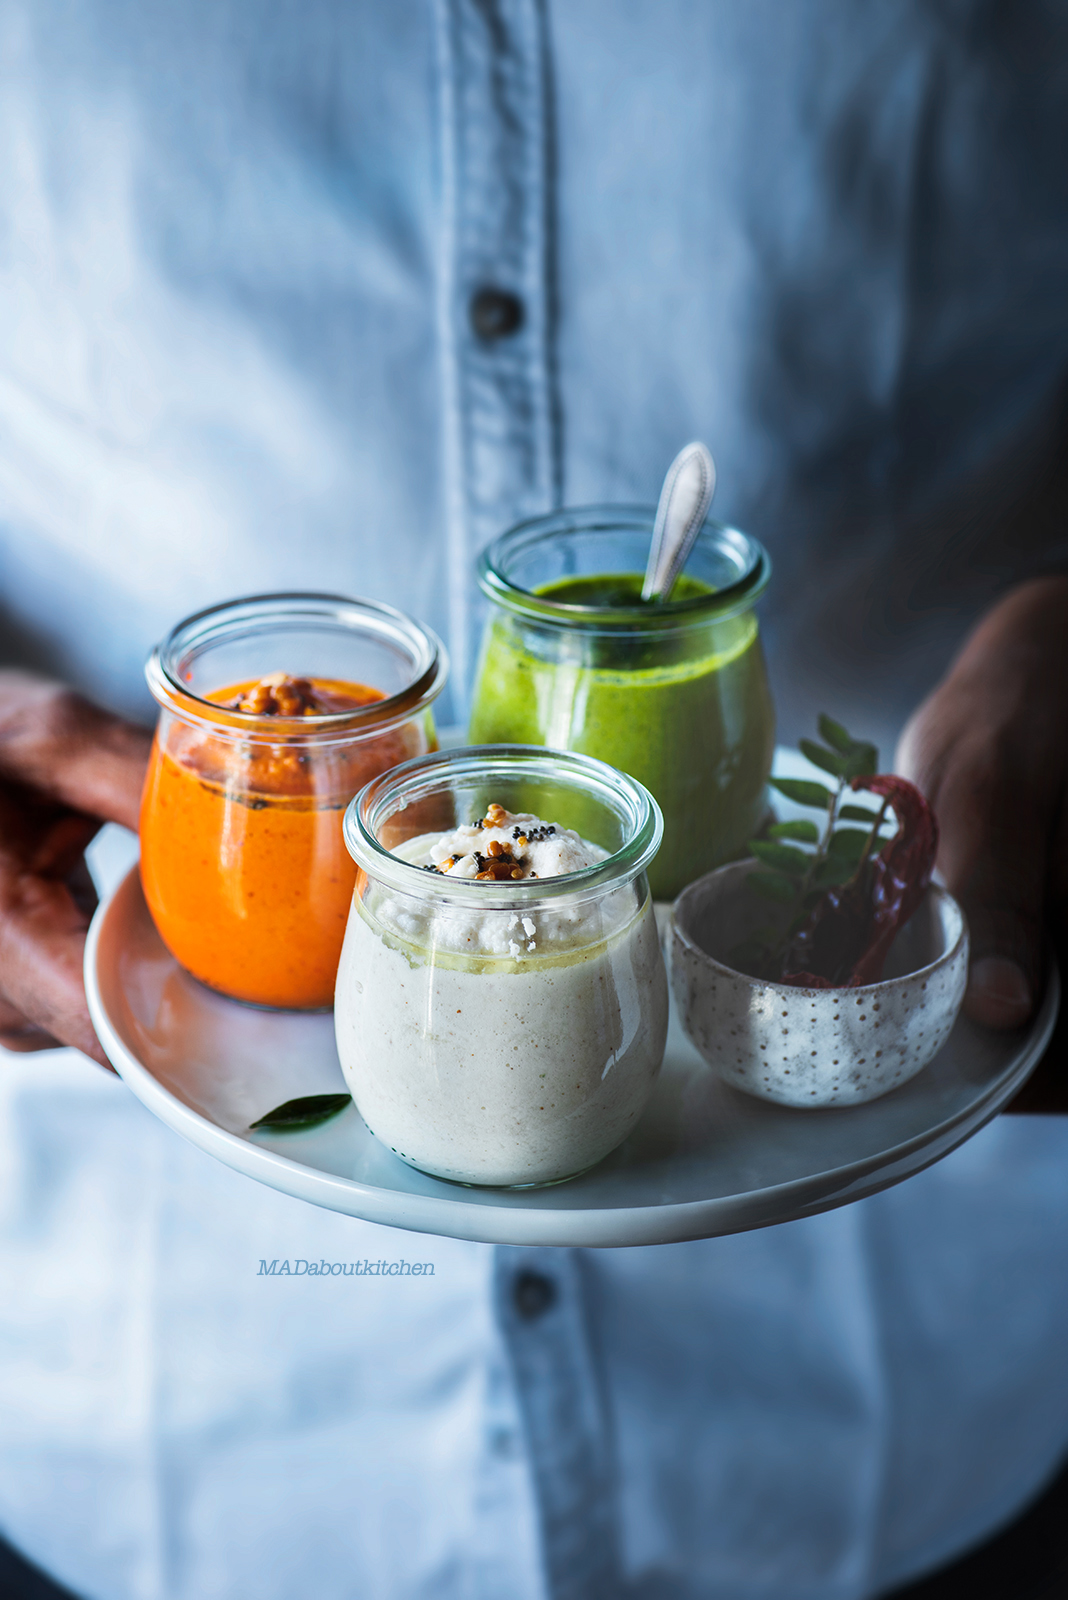 Chutneys are the main accompaniment to most of the South Indian dishes like idli, dosa and vada. The three main chutneys are tomato, coconut and coriander.